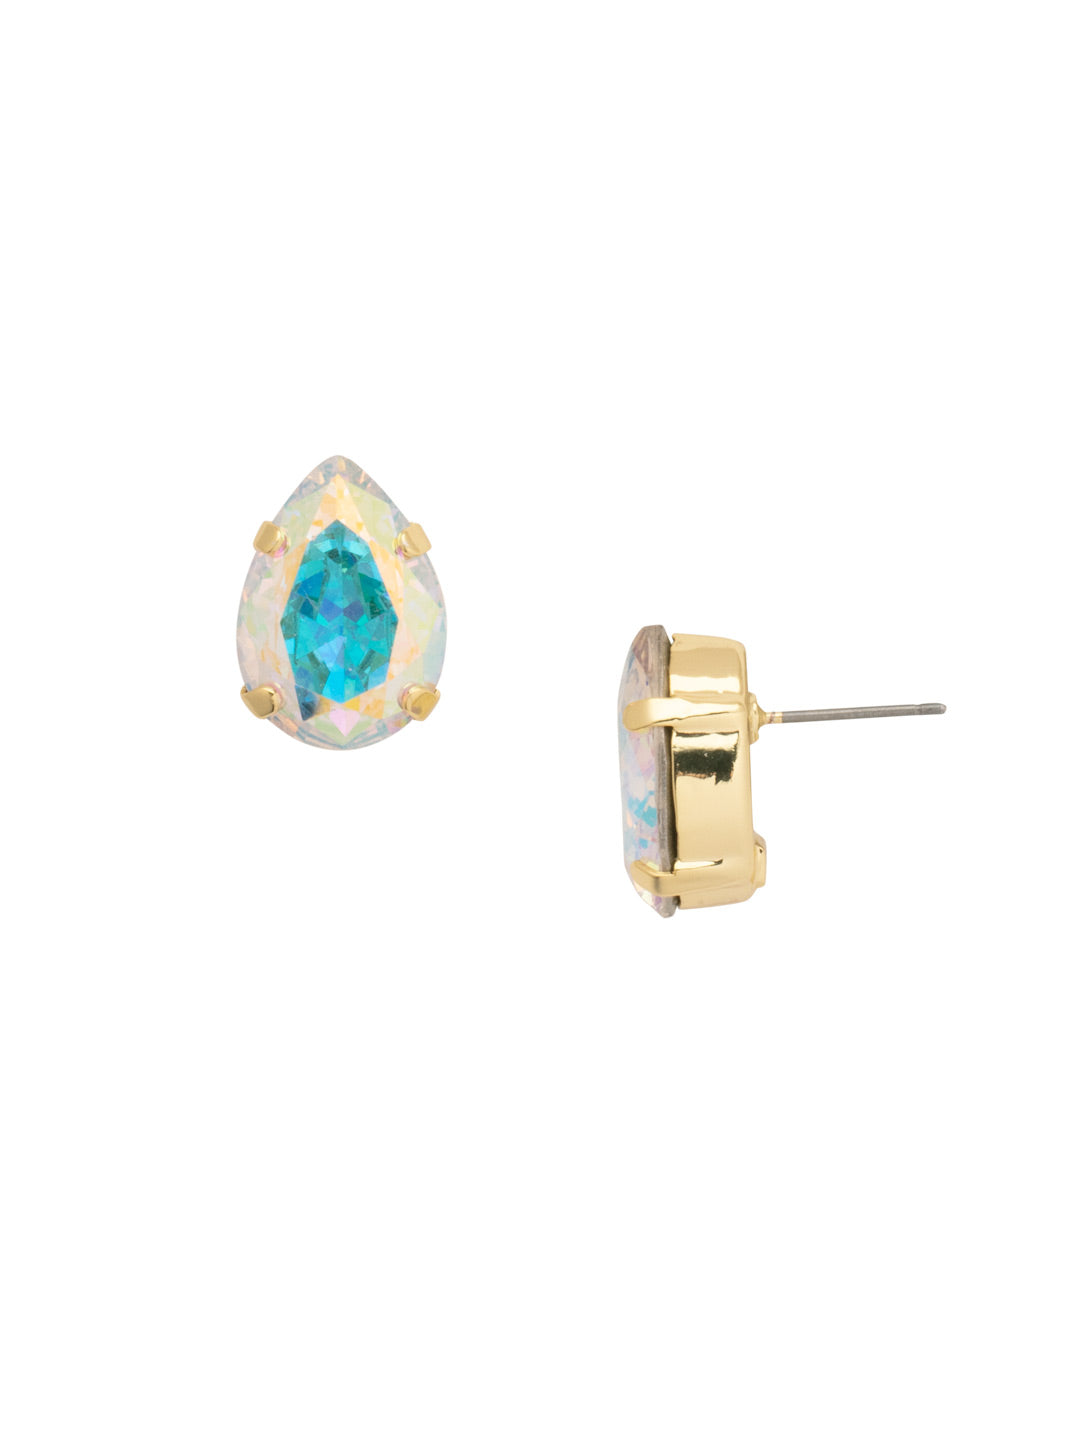 Eileen Stud Earrings - EFF100BGCAB - <p>The Eileen Stud Earrings feature a single pear cut candy gem crystal on a post. From Sorrelli's Crystal Aurora Borealis collection in our Bright Gold-tone finish.</p>